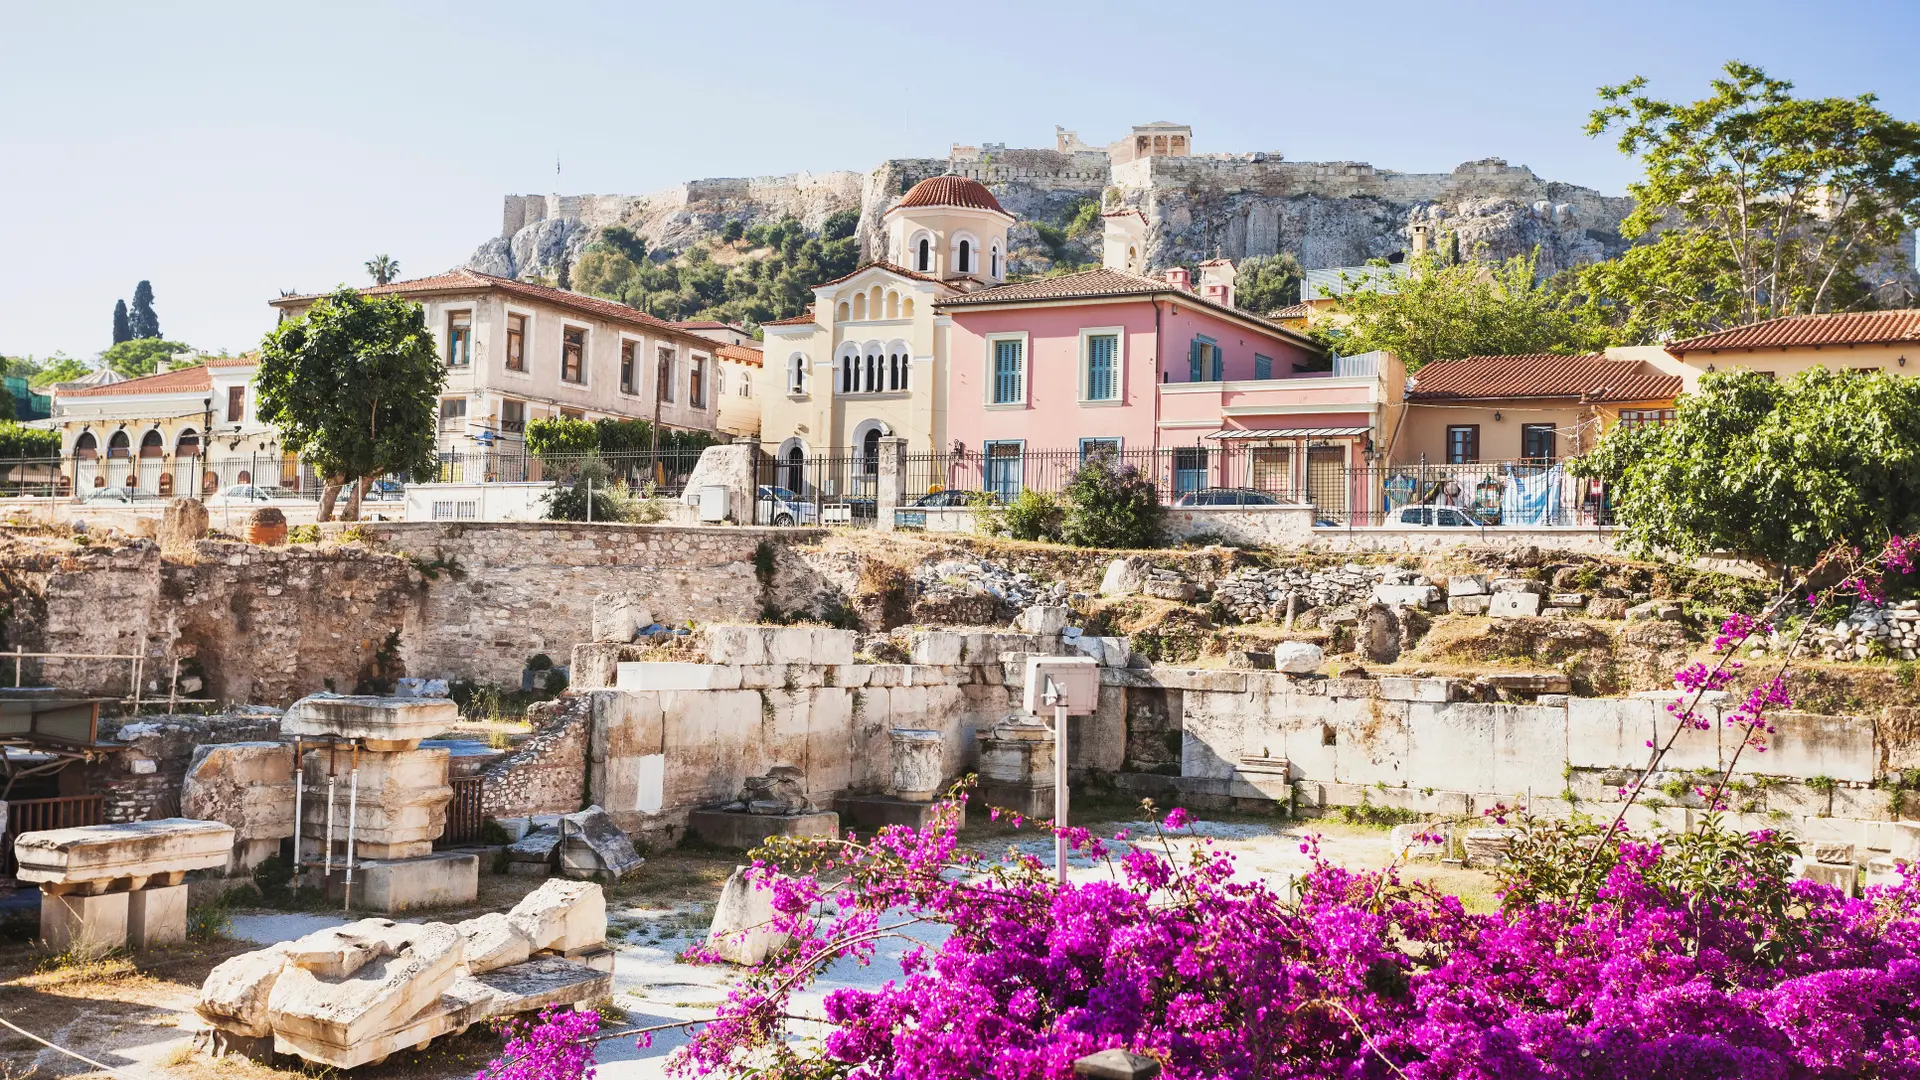 A place in athens with purple flowers in the foreground and some houses with a cliff in the background.